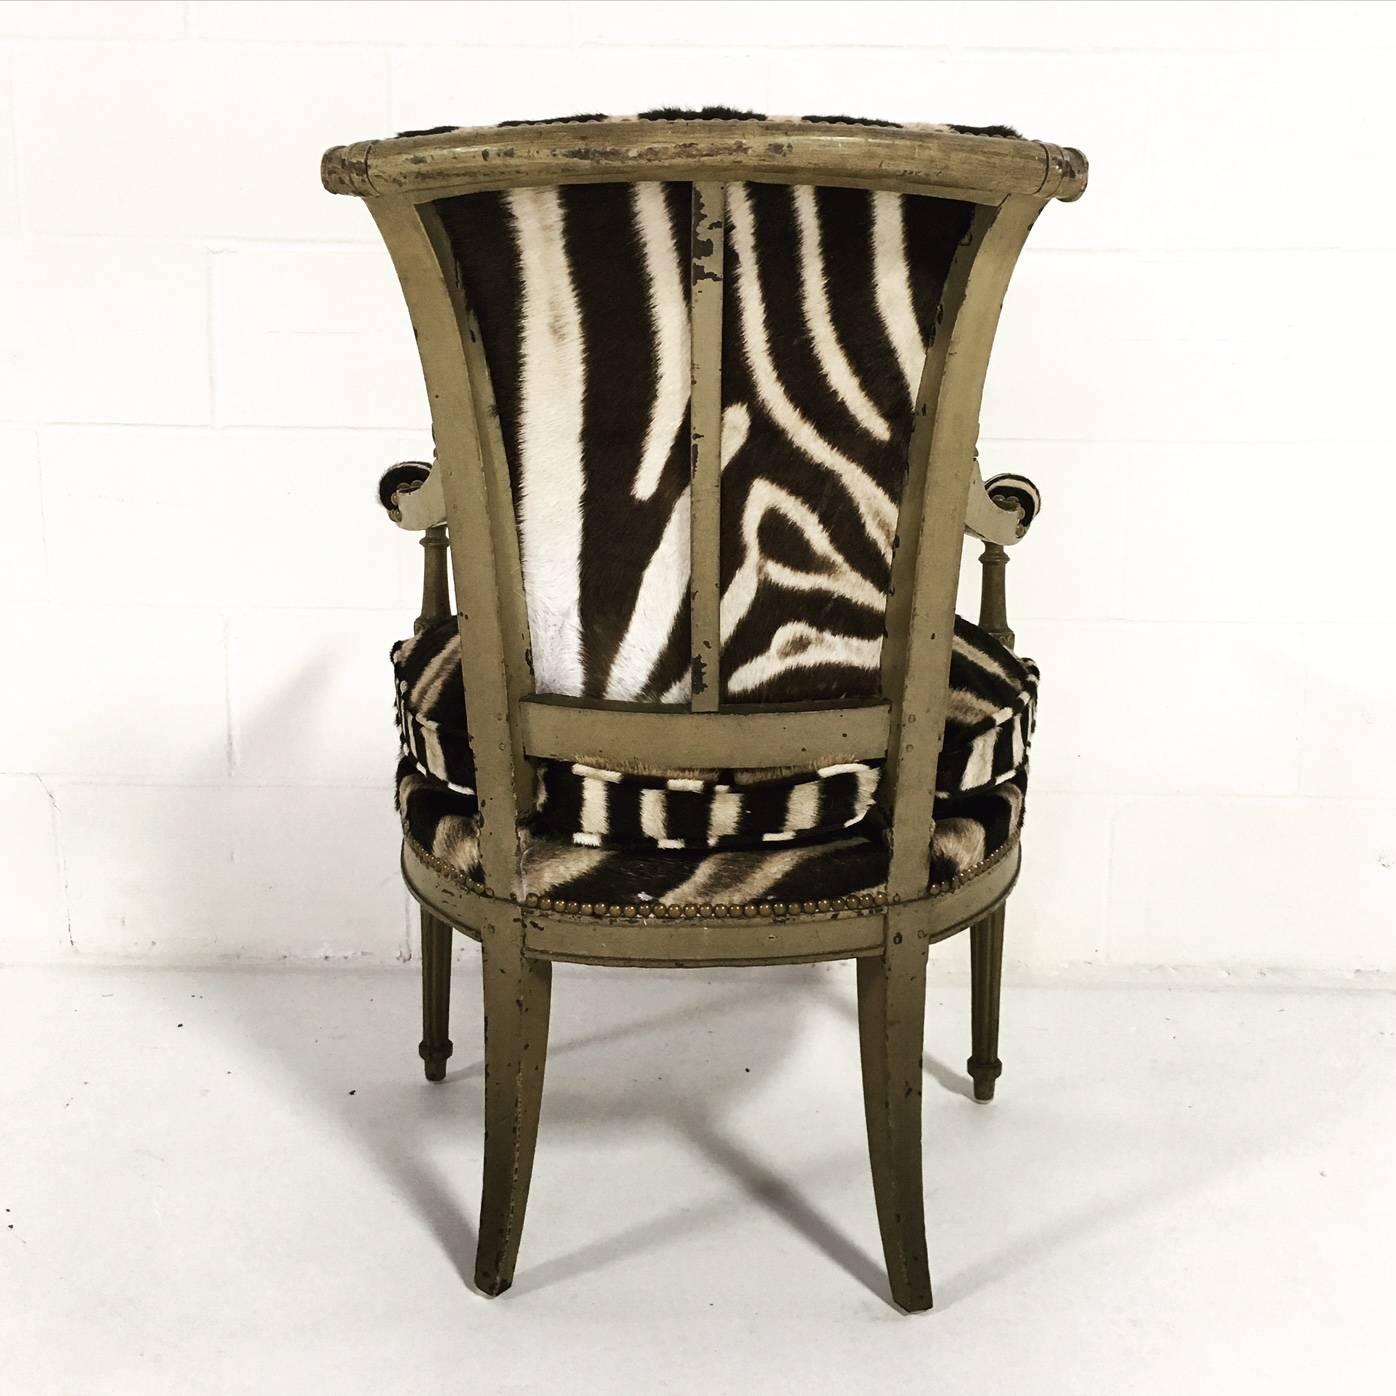 This charming boudoir chair has been masterfully upholstered in Burchell's zebra hide. We love the curving back and the loose cushion. The expert upholstery is finished with brass nail heads. The perfect accent chair.